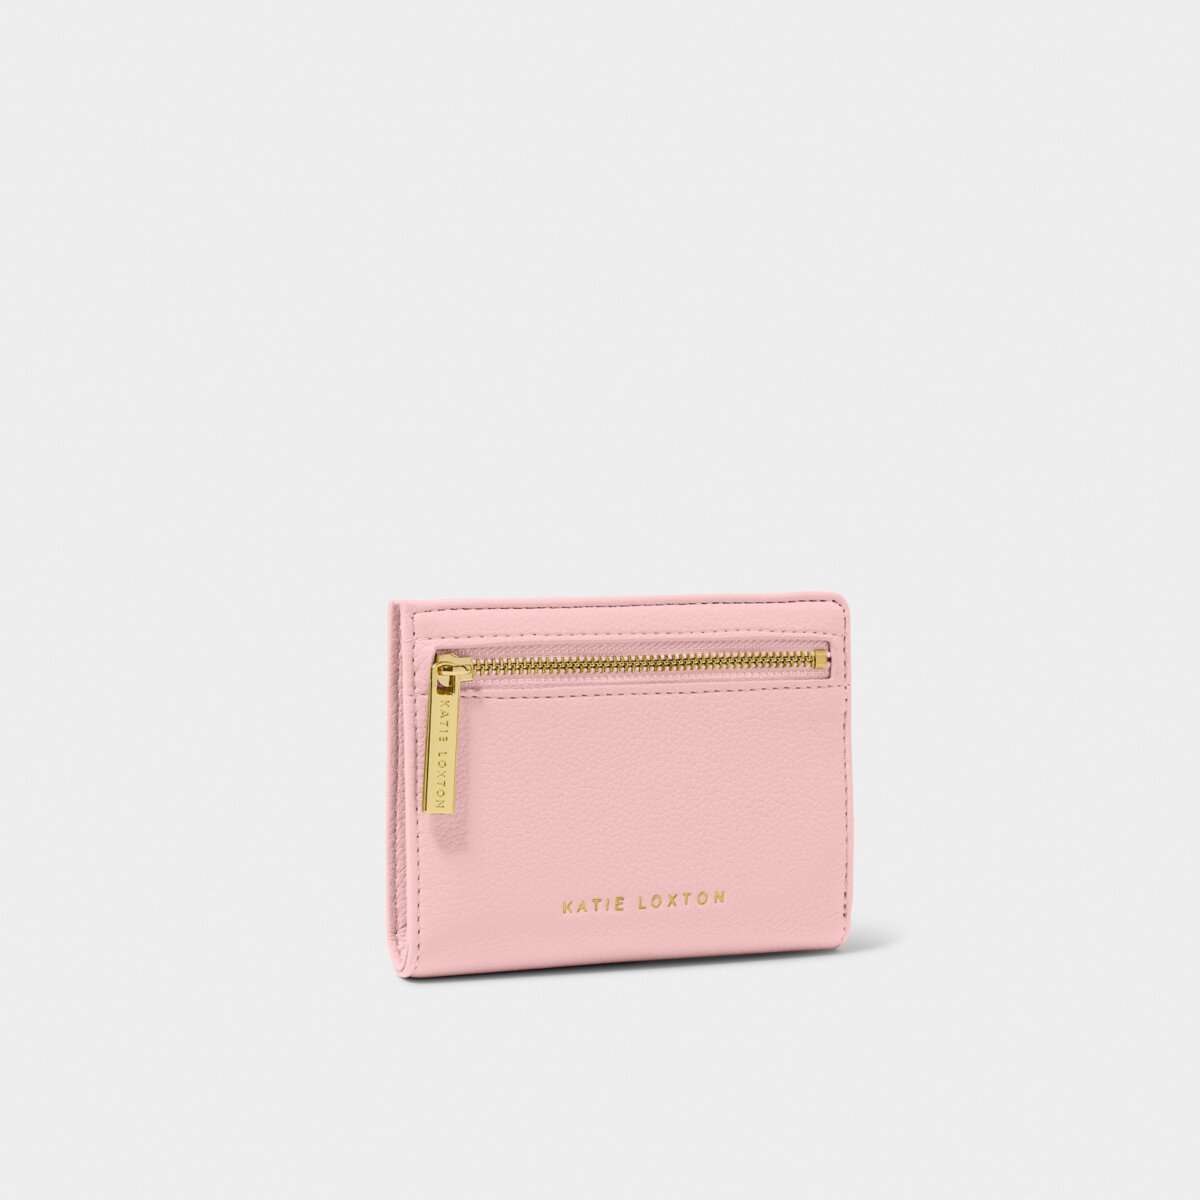 The Katie Loxton Jayde purse, which is a small rectangluar shape in baby pink with a gold zipper. The purse has Katie Loxton embossed in gold in small letters